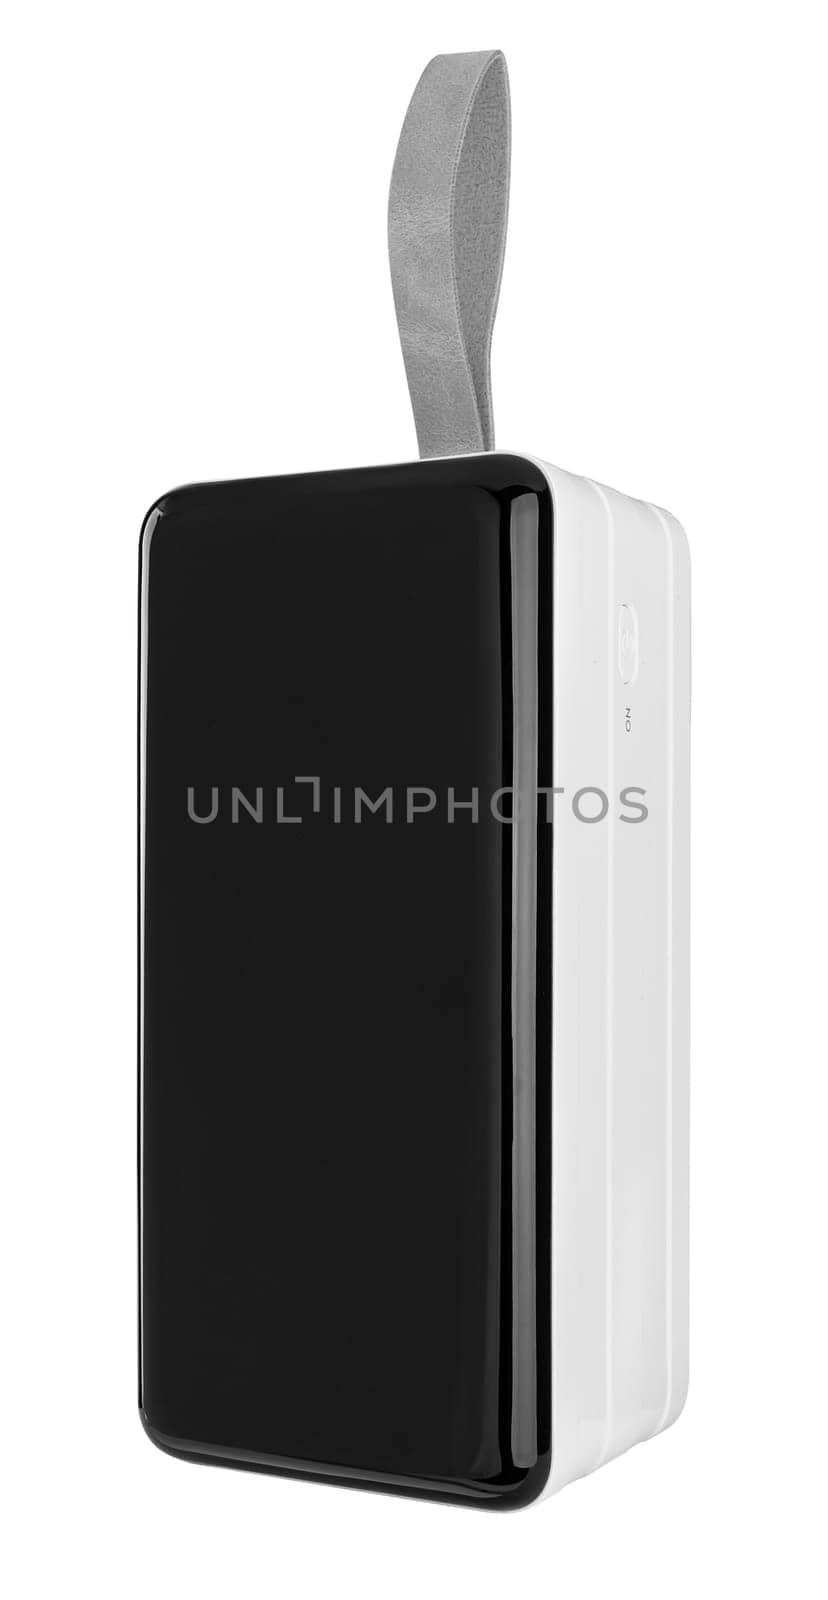 external portable battery for charging your phone and other gadgets, on a white background in insulation by A_A